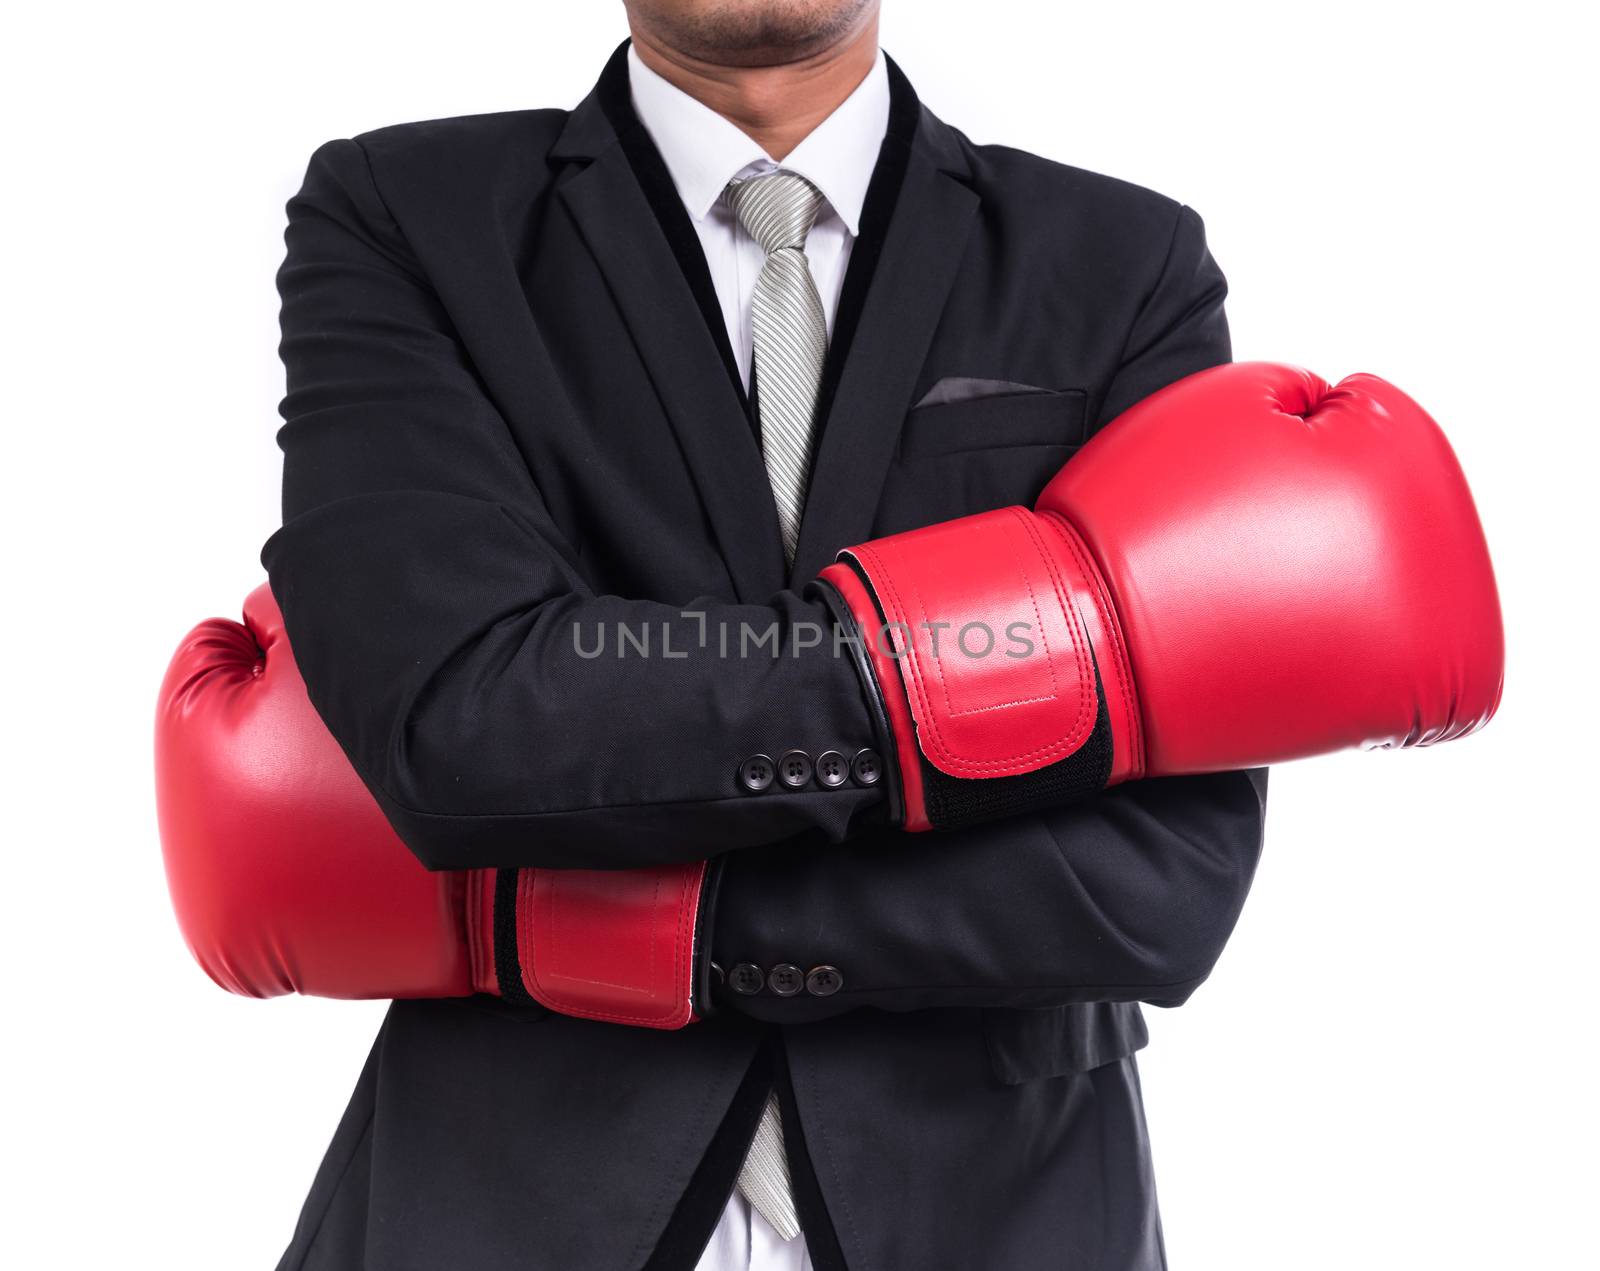 Businessman standing posture with boxing gloves isolated on white background